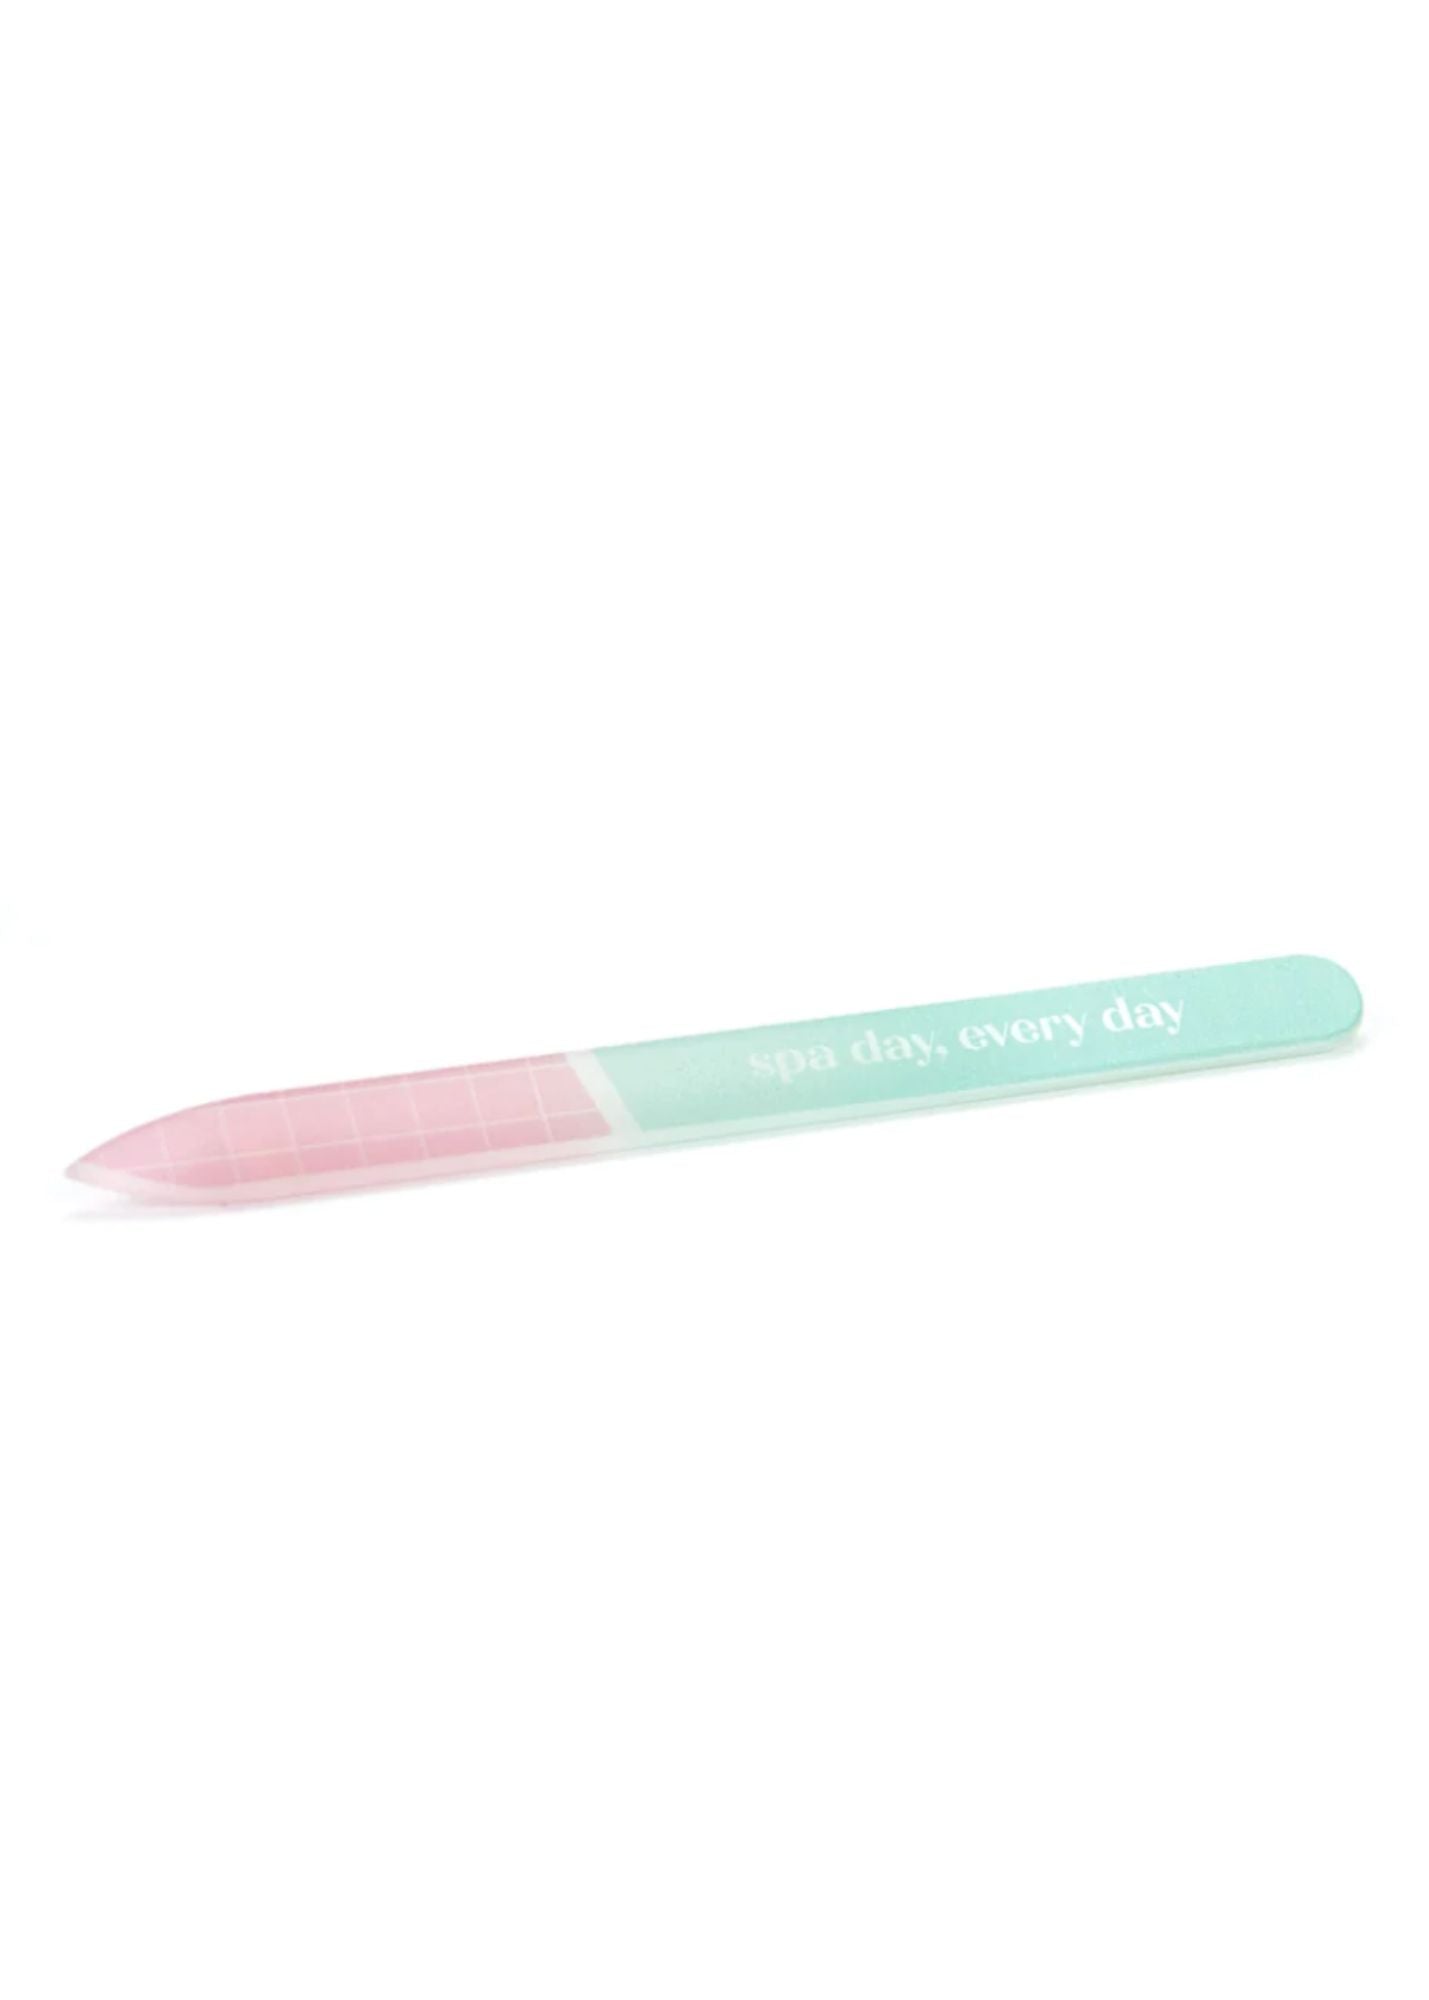 Colorful Glass Nail File Gifts Spa Day Every day